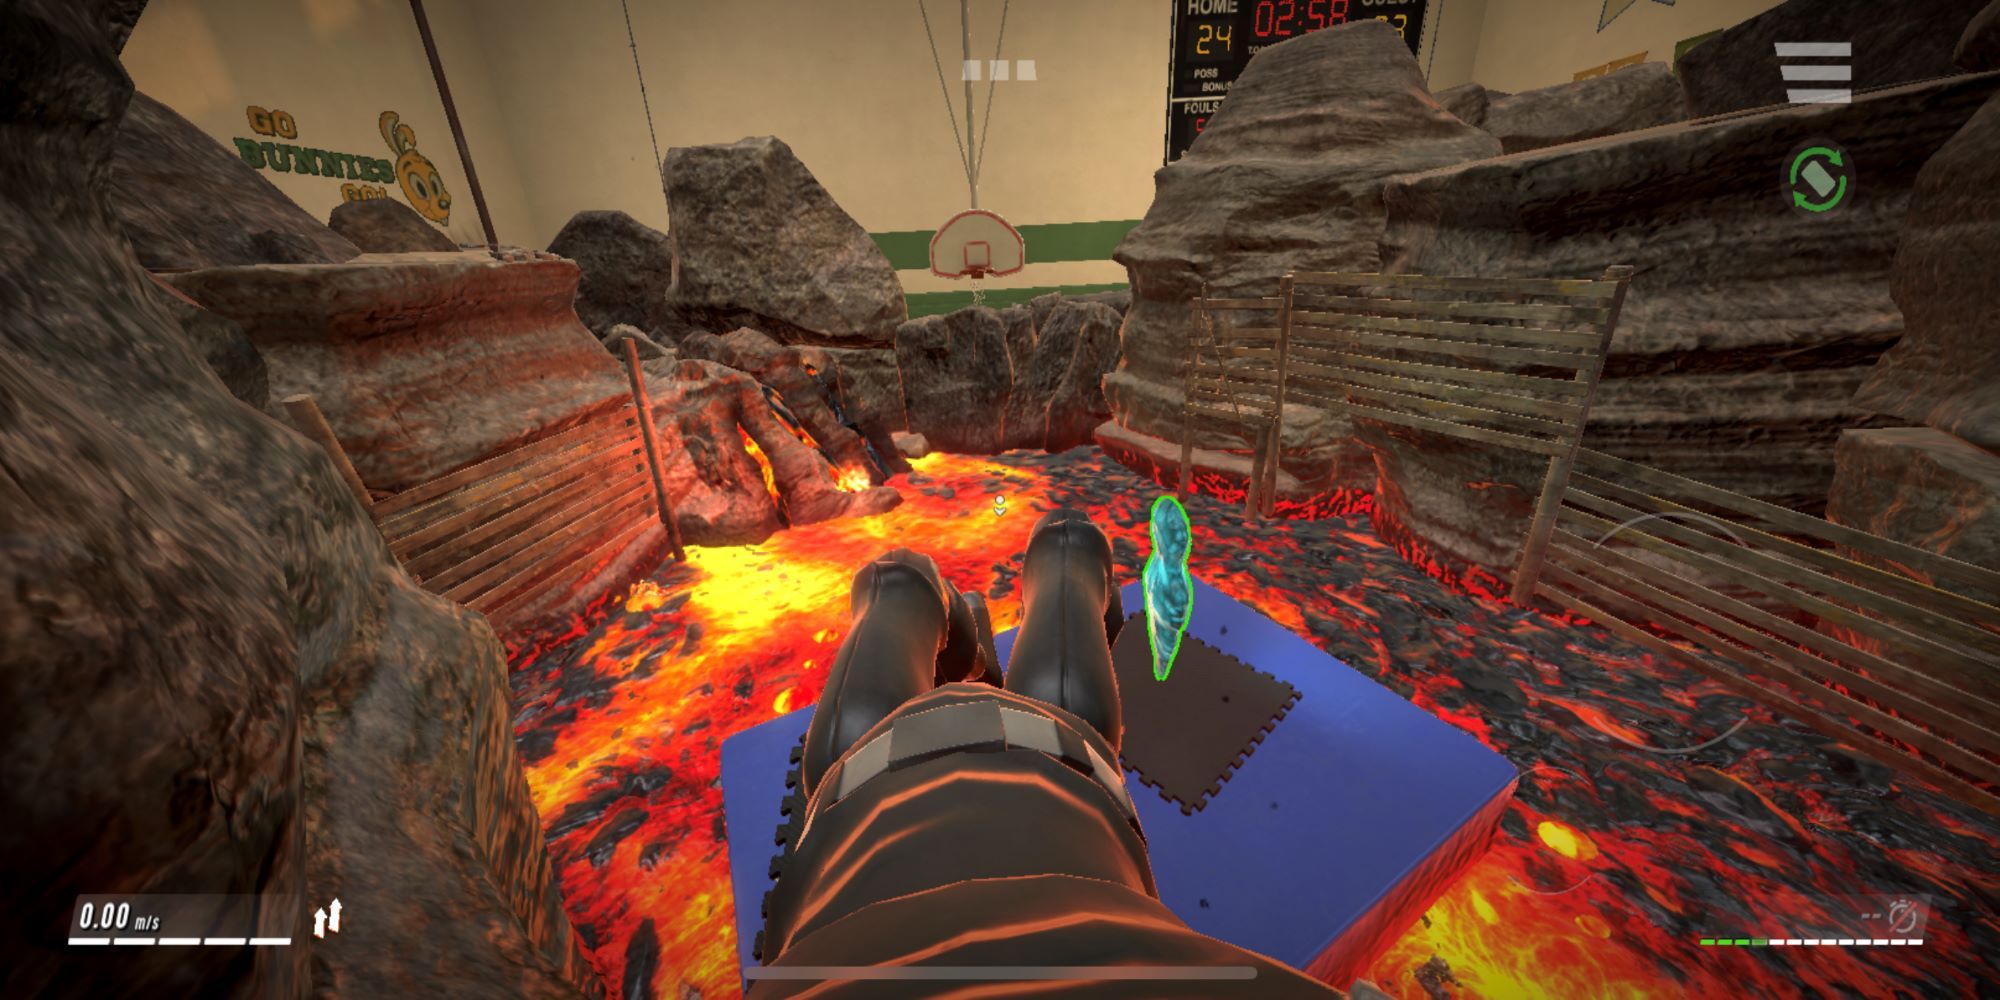 The player swings from a rope to a gym mat while avoiding a fiery death in The Floor Is Lava.